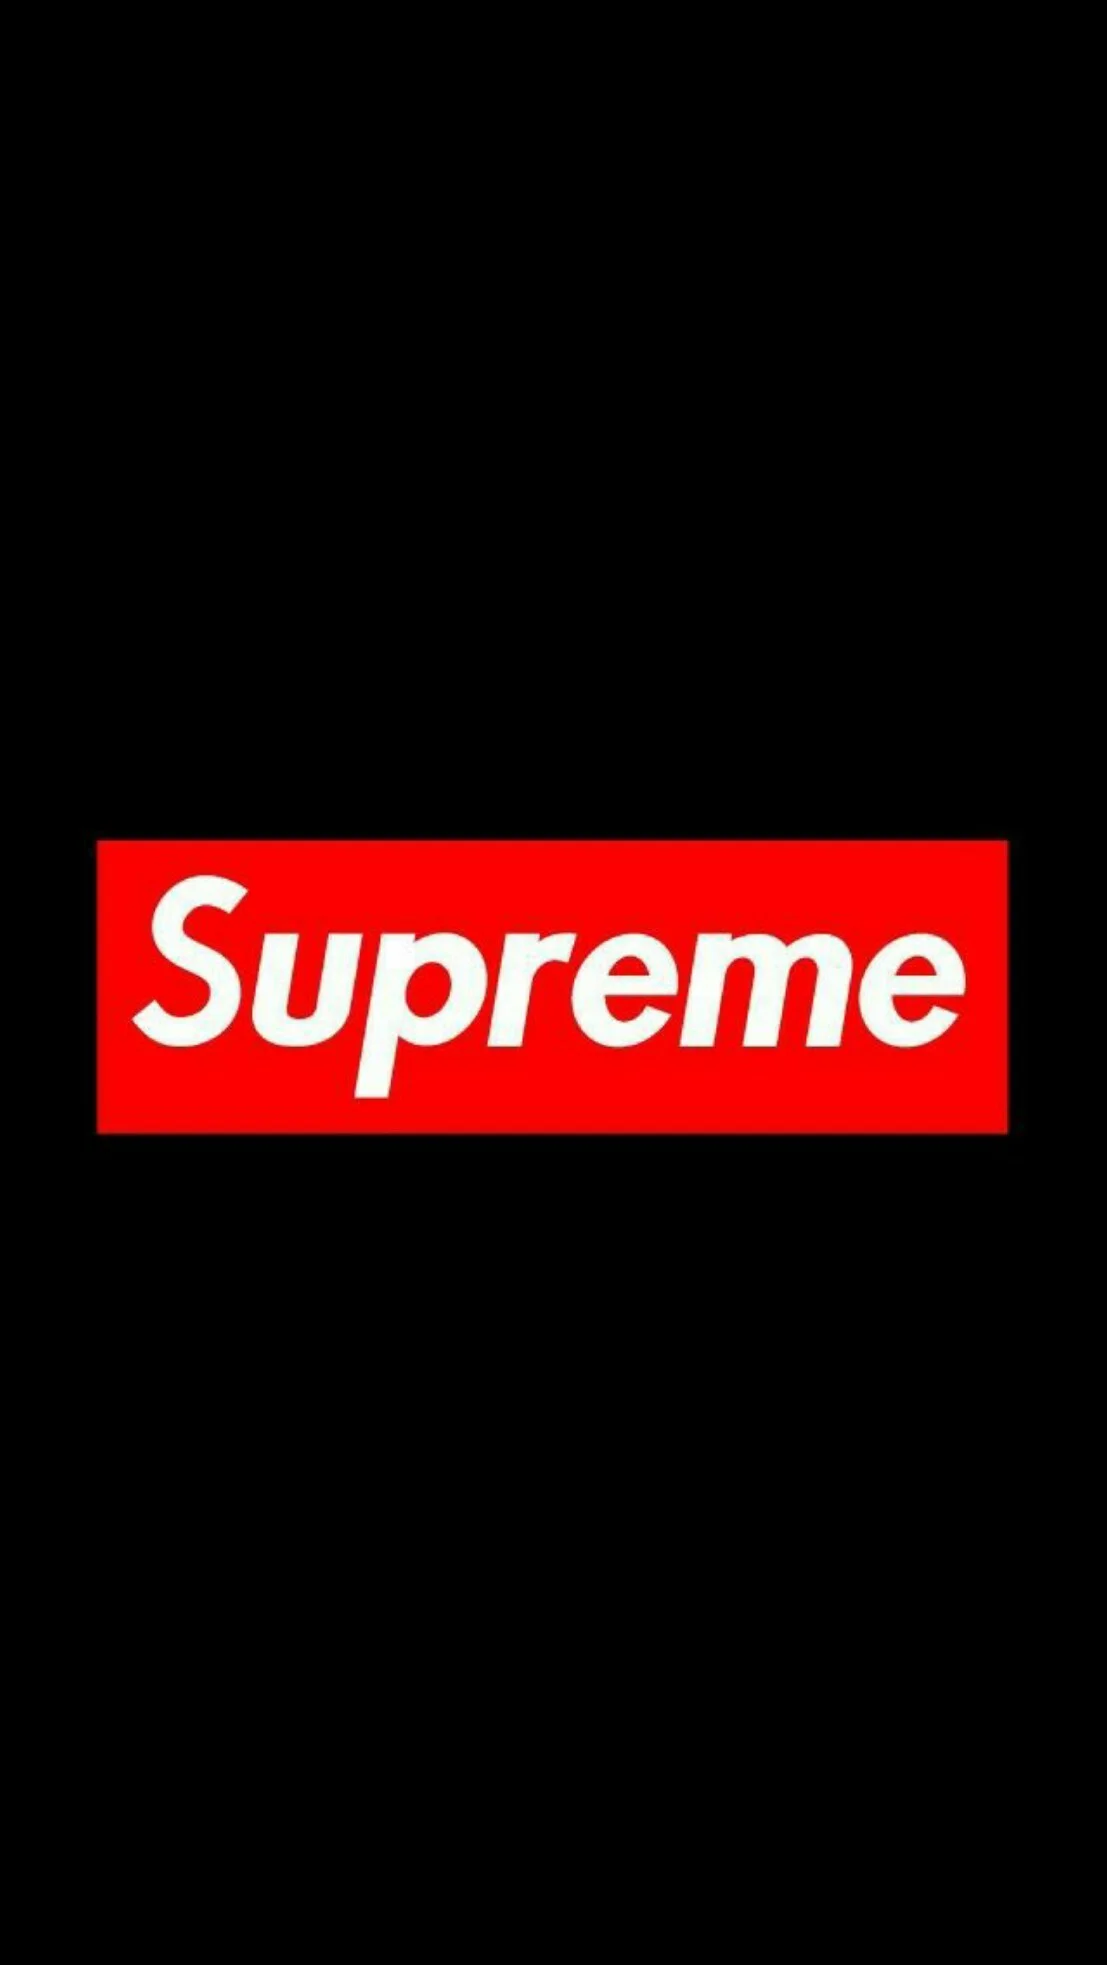 #supreme #black #wallpaper #iPhone #android